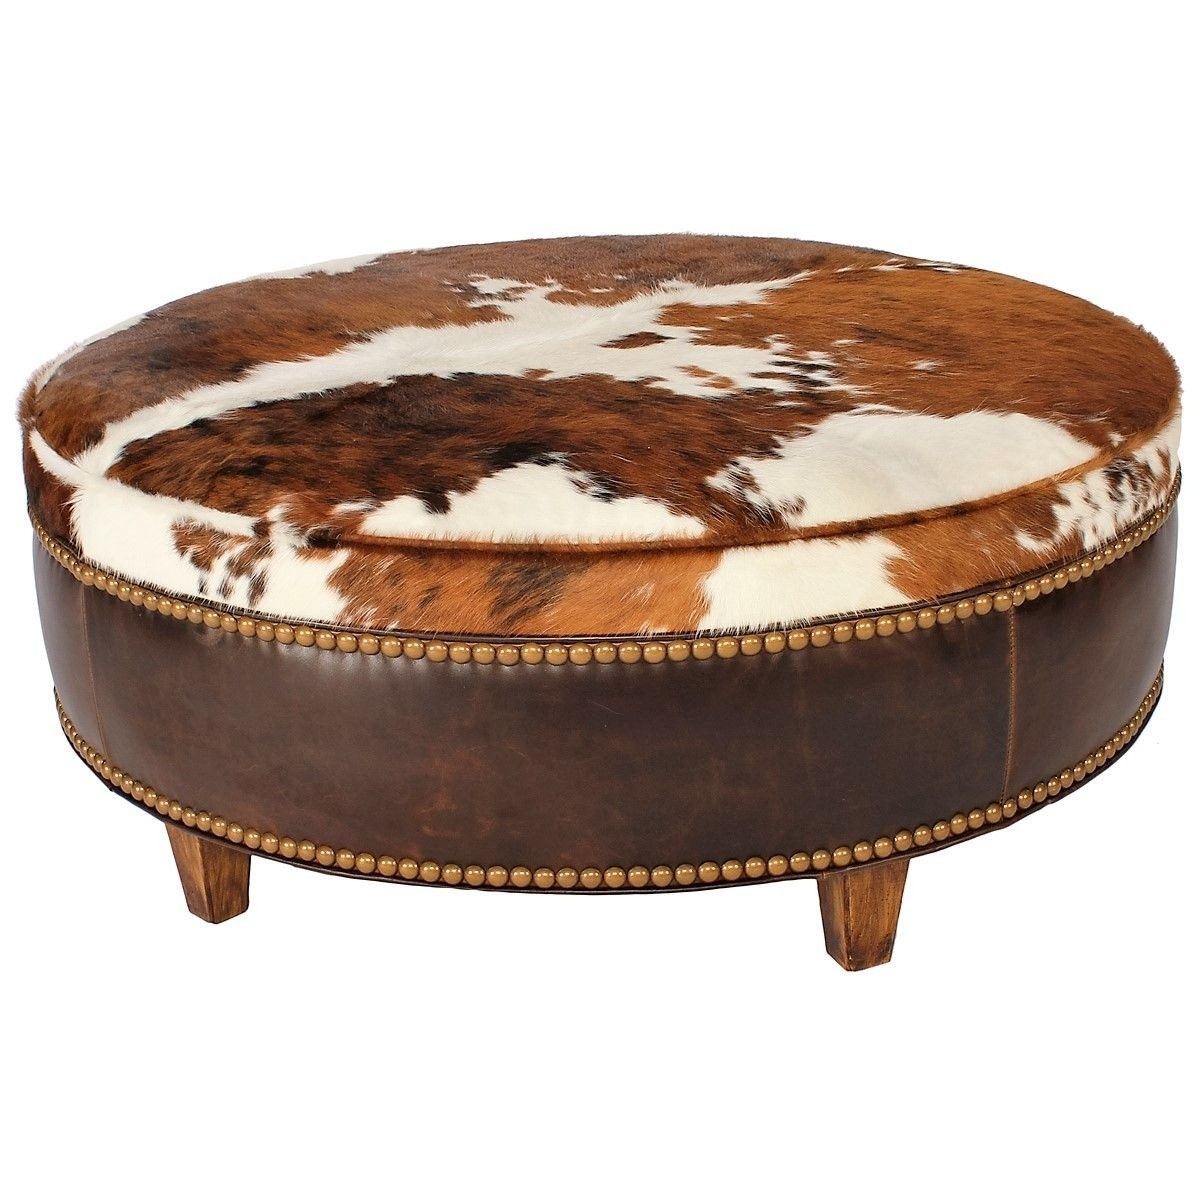 Our round cowhide ottoman is available in 4 hide choices